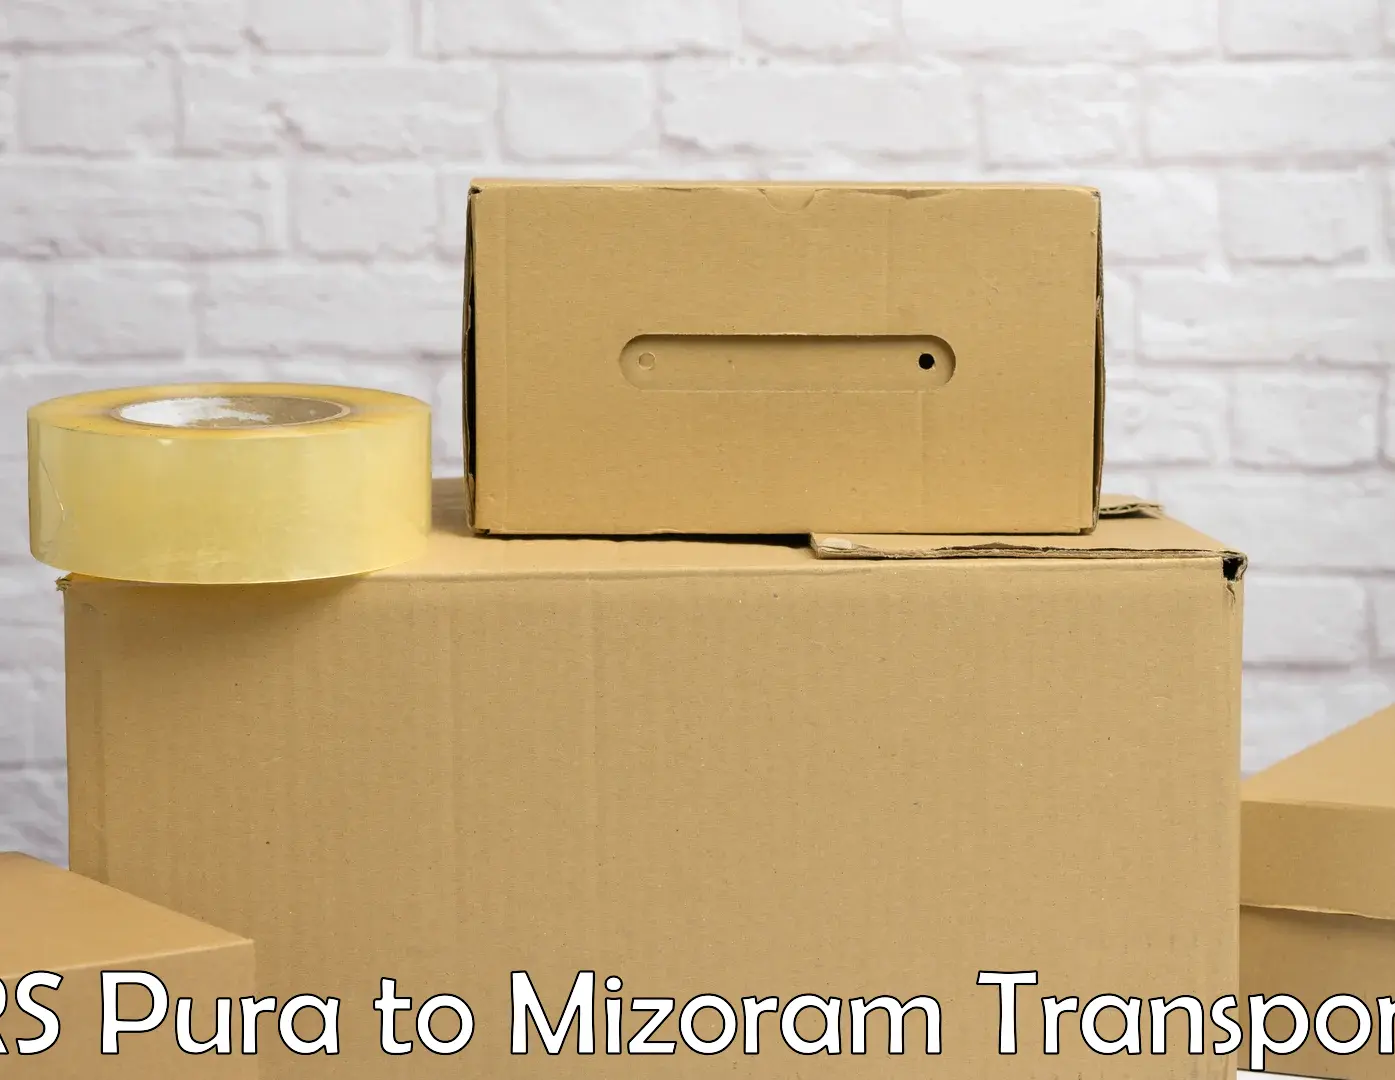 Delivery service RS Pura to Mizoram